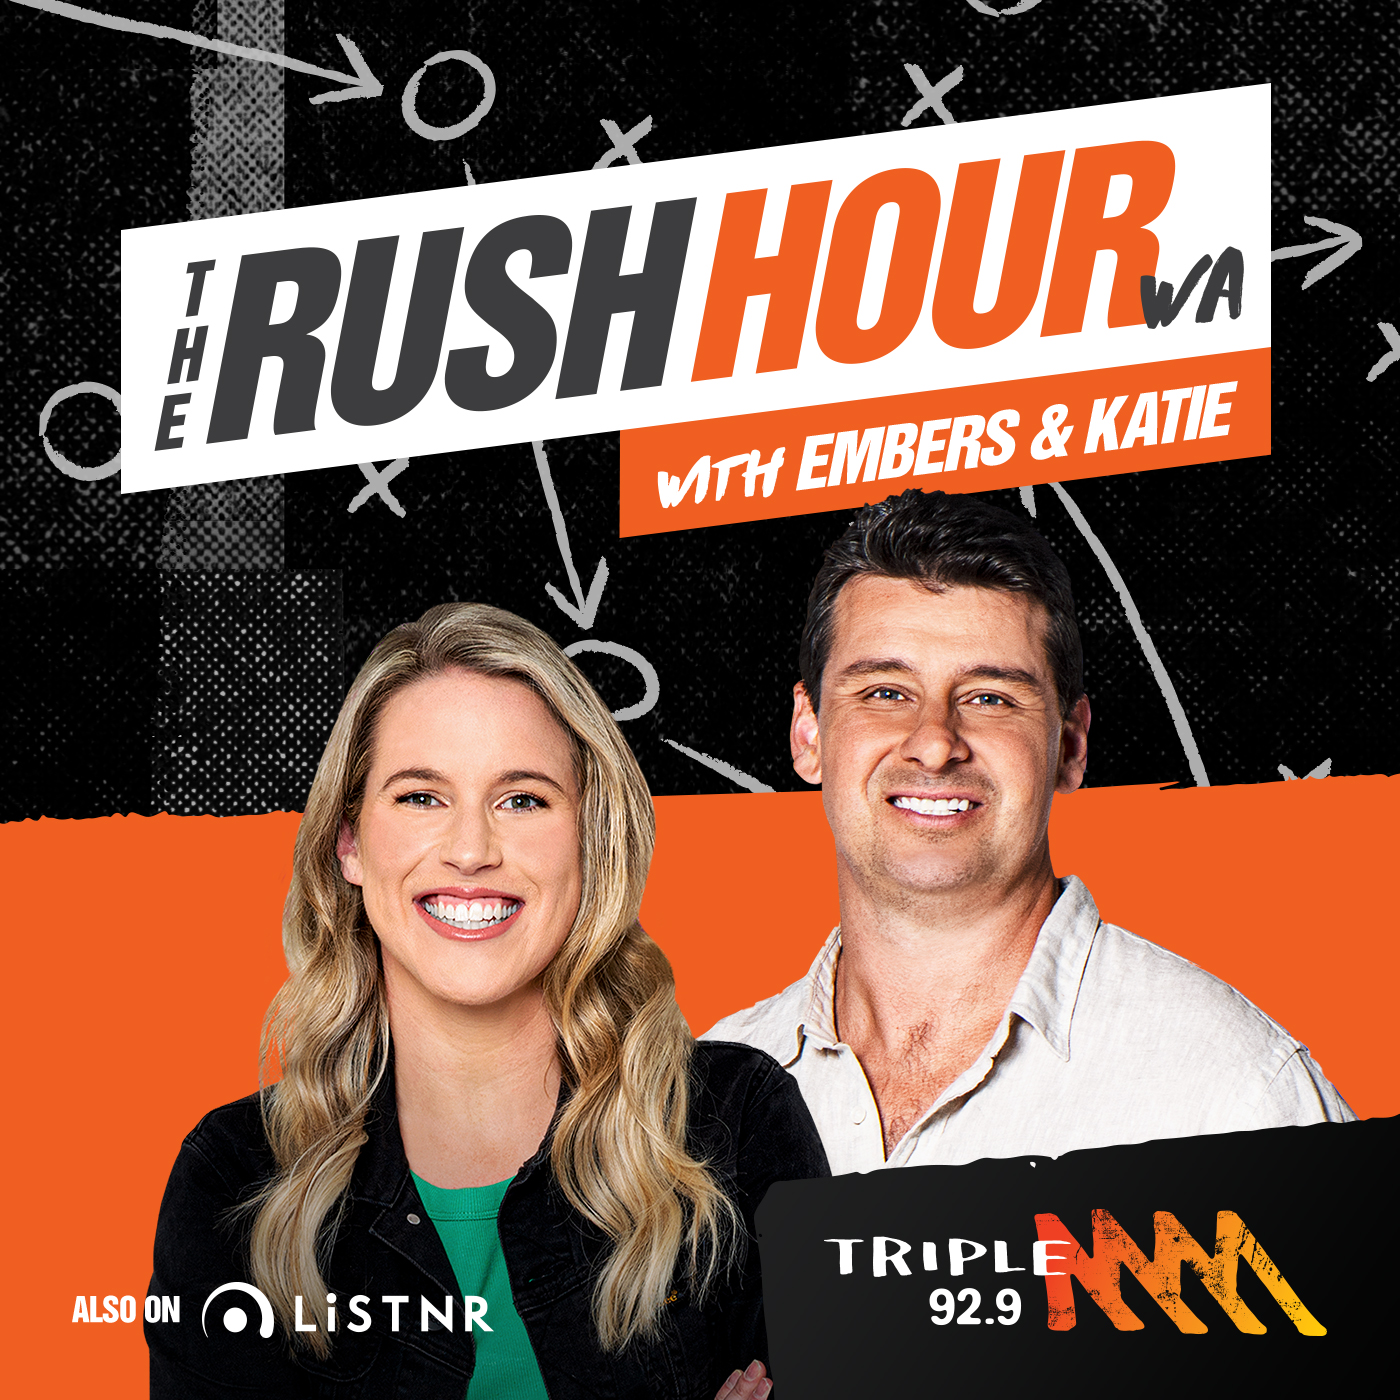 Full Show | Embers & Katie Joined By West Coast Eagles Star Harley Reid!